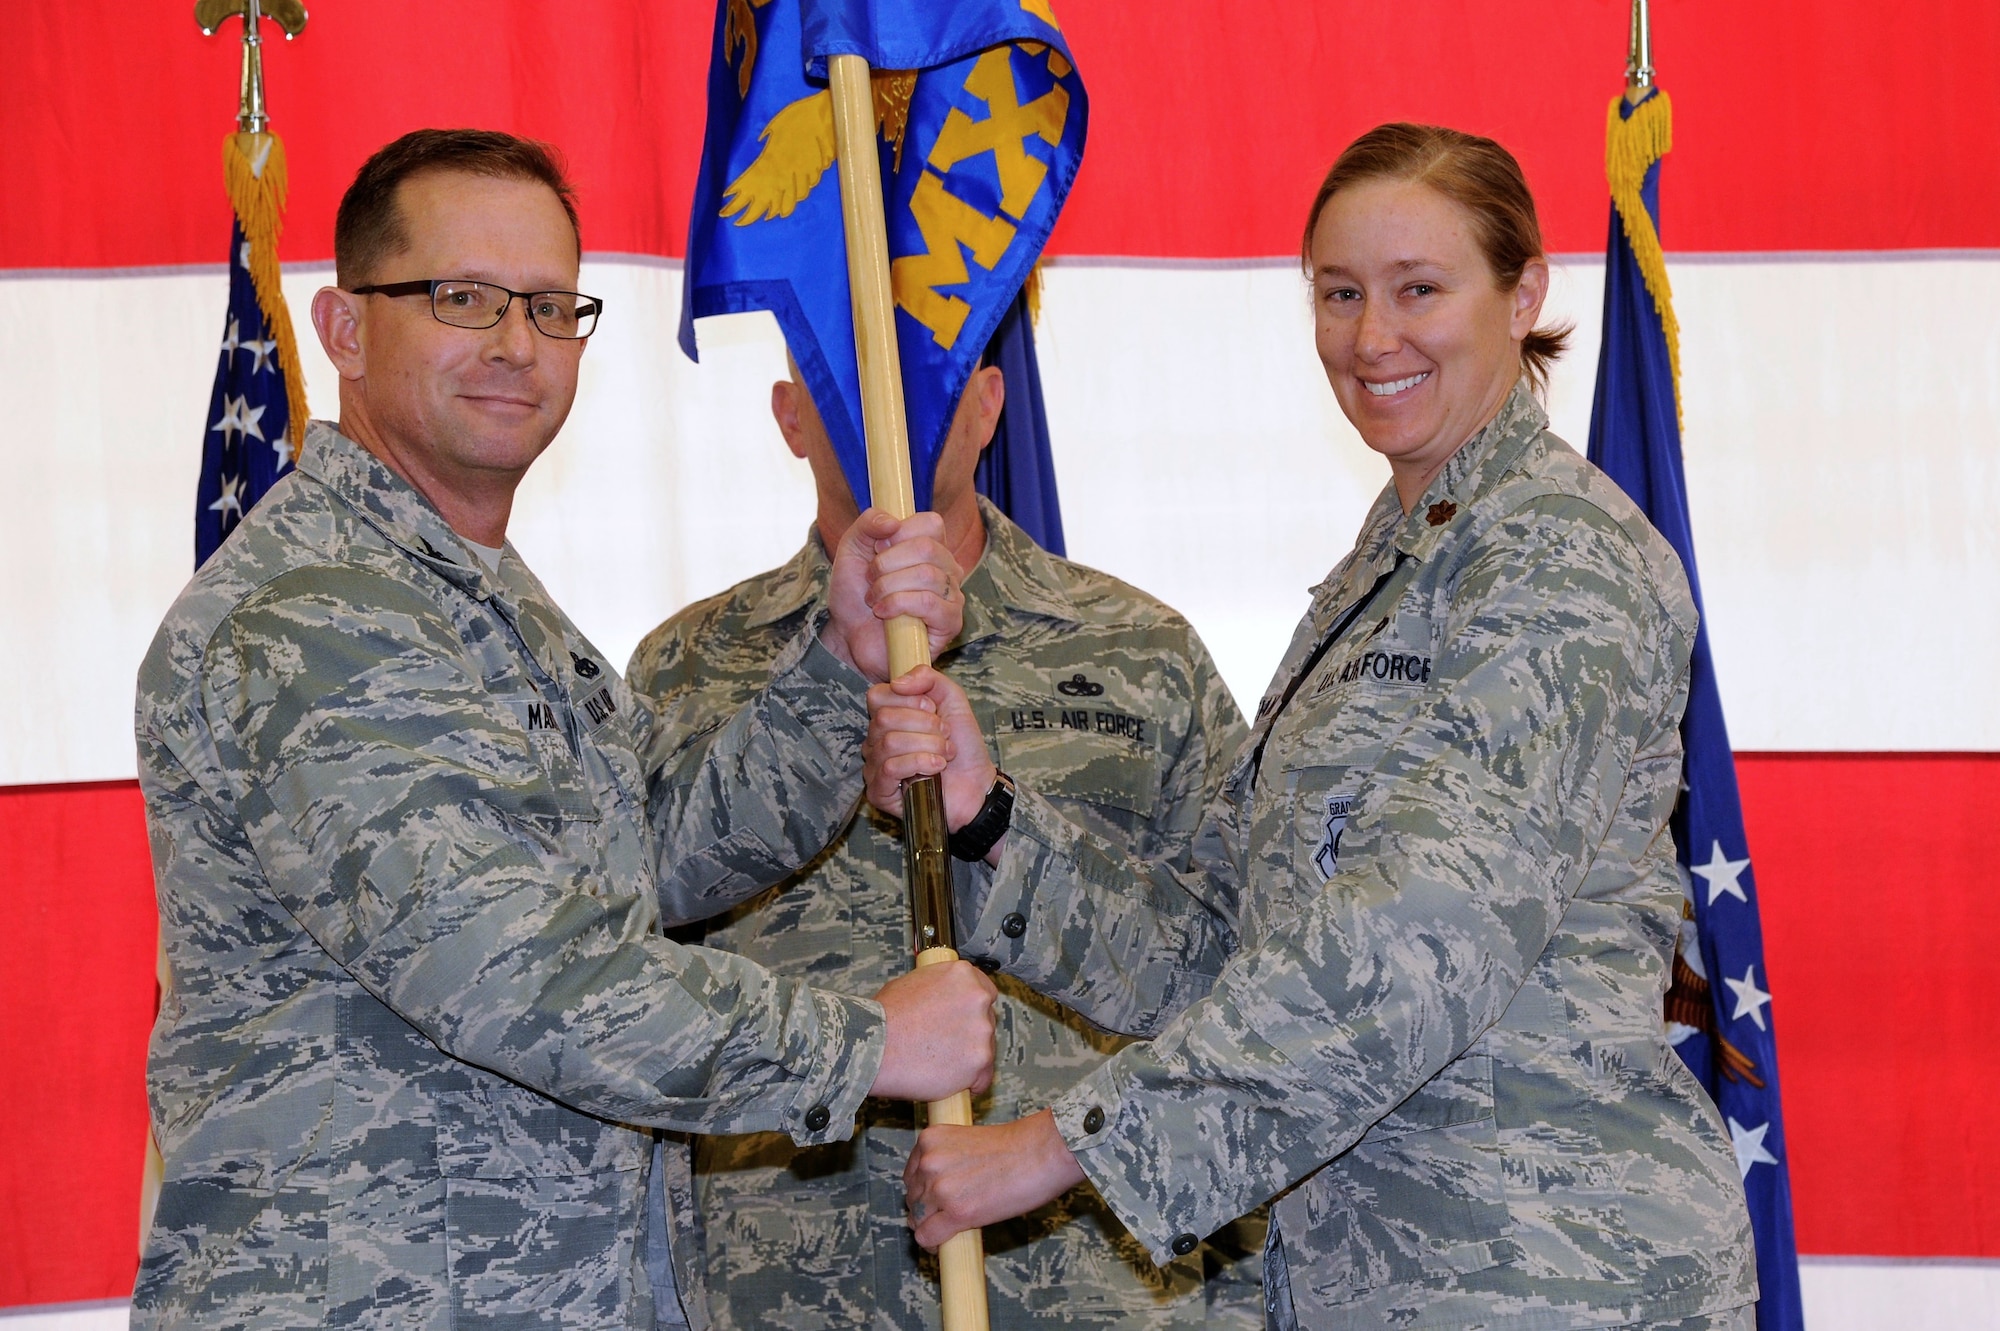 Col. Jason Martin, the 302nd Maintenance Group commander, passes the 302nd Maintenance Squadron guidon to Maj. Katherine Schifani, the new 302nd MXS commander, during an assumption of command ceremony at Peterson Air Force Base, Colorado, May 5, 2018.